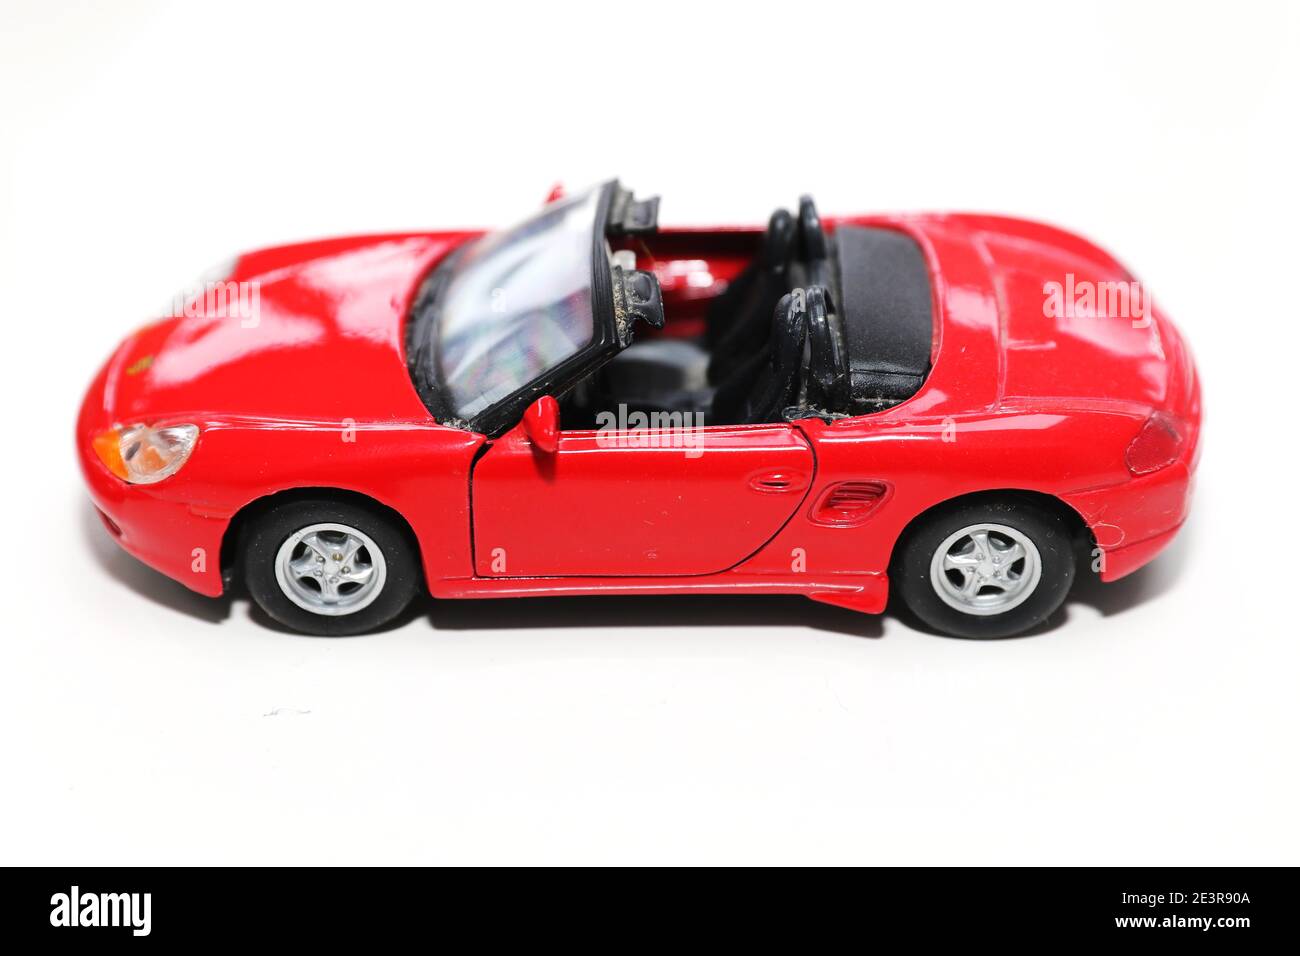 Porsche Boxster model car and Porsche sports car keys  Picture by Antony Thompson - Thousand Word Media, NO SALES, NO SYNDICATION. Contact for more in Stock Photo